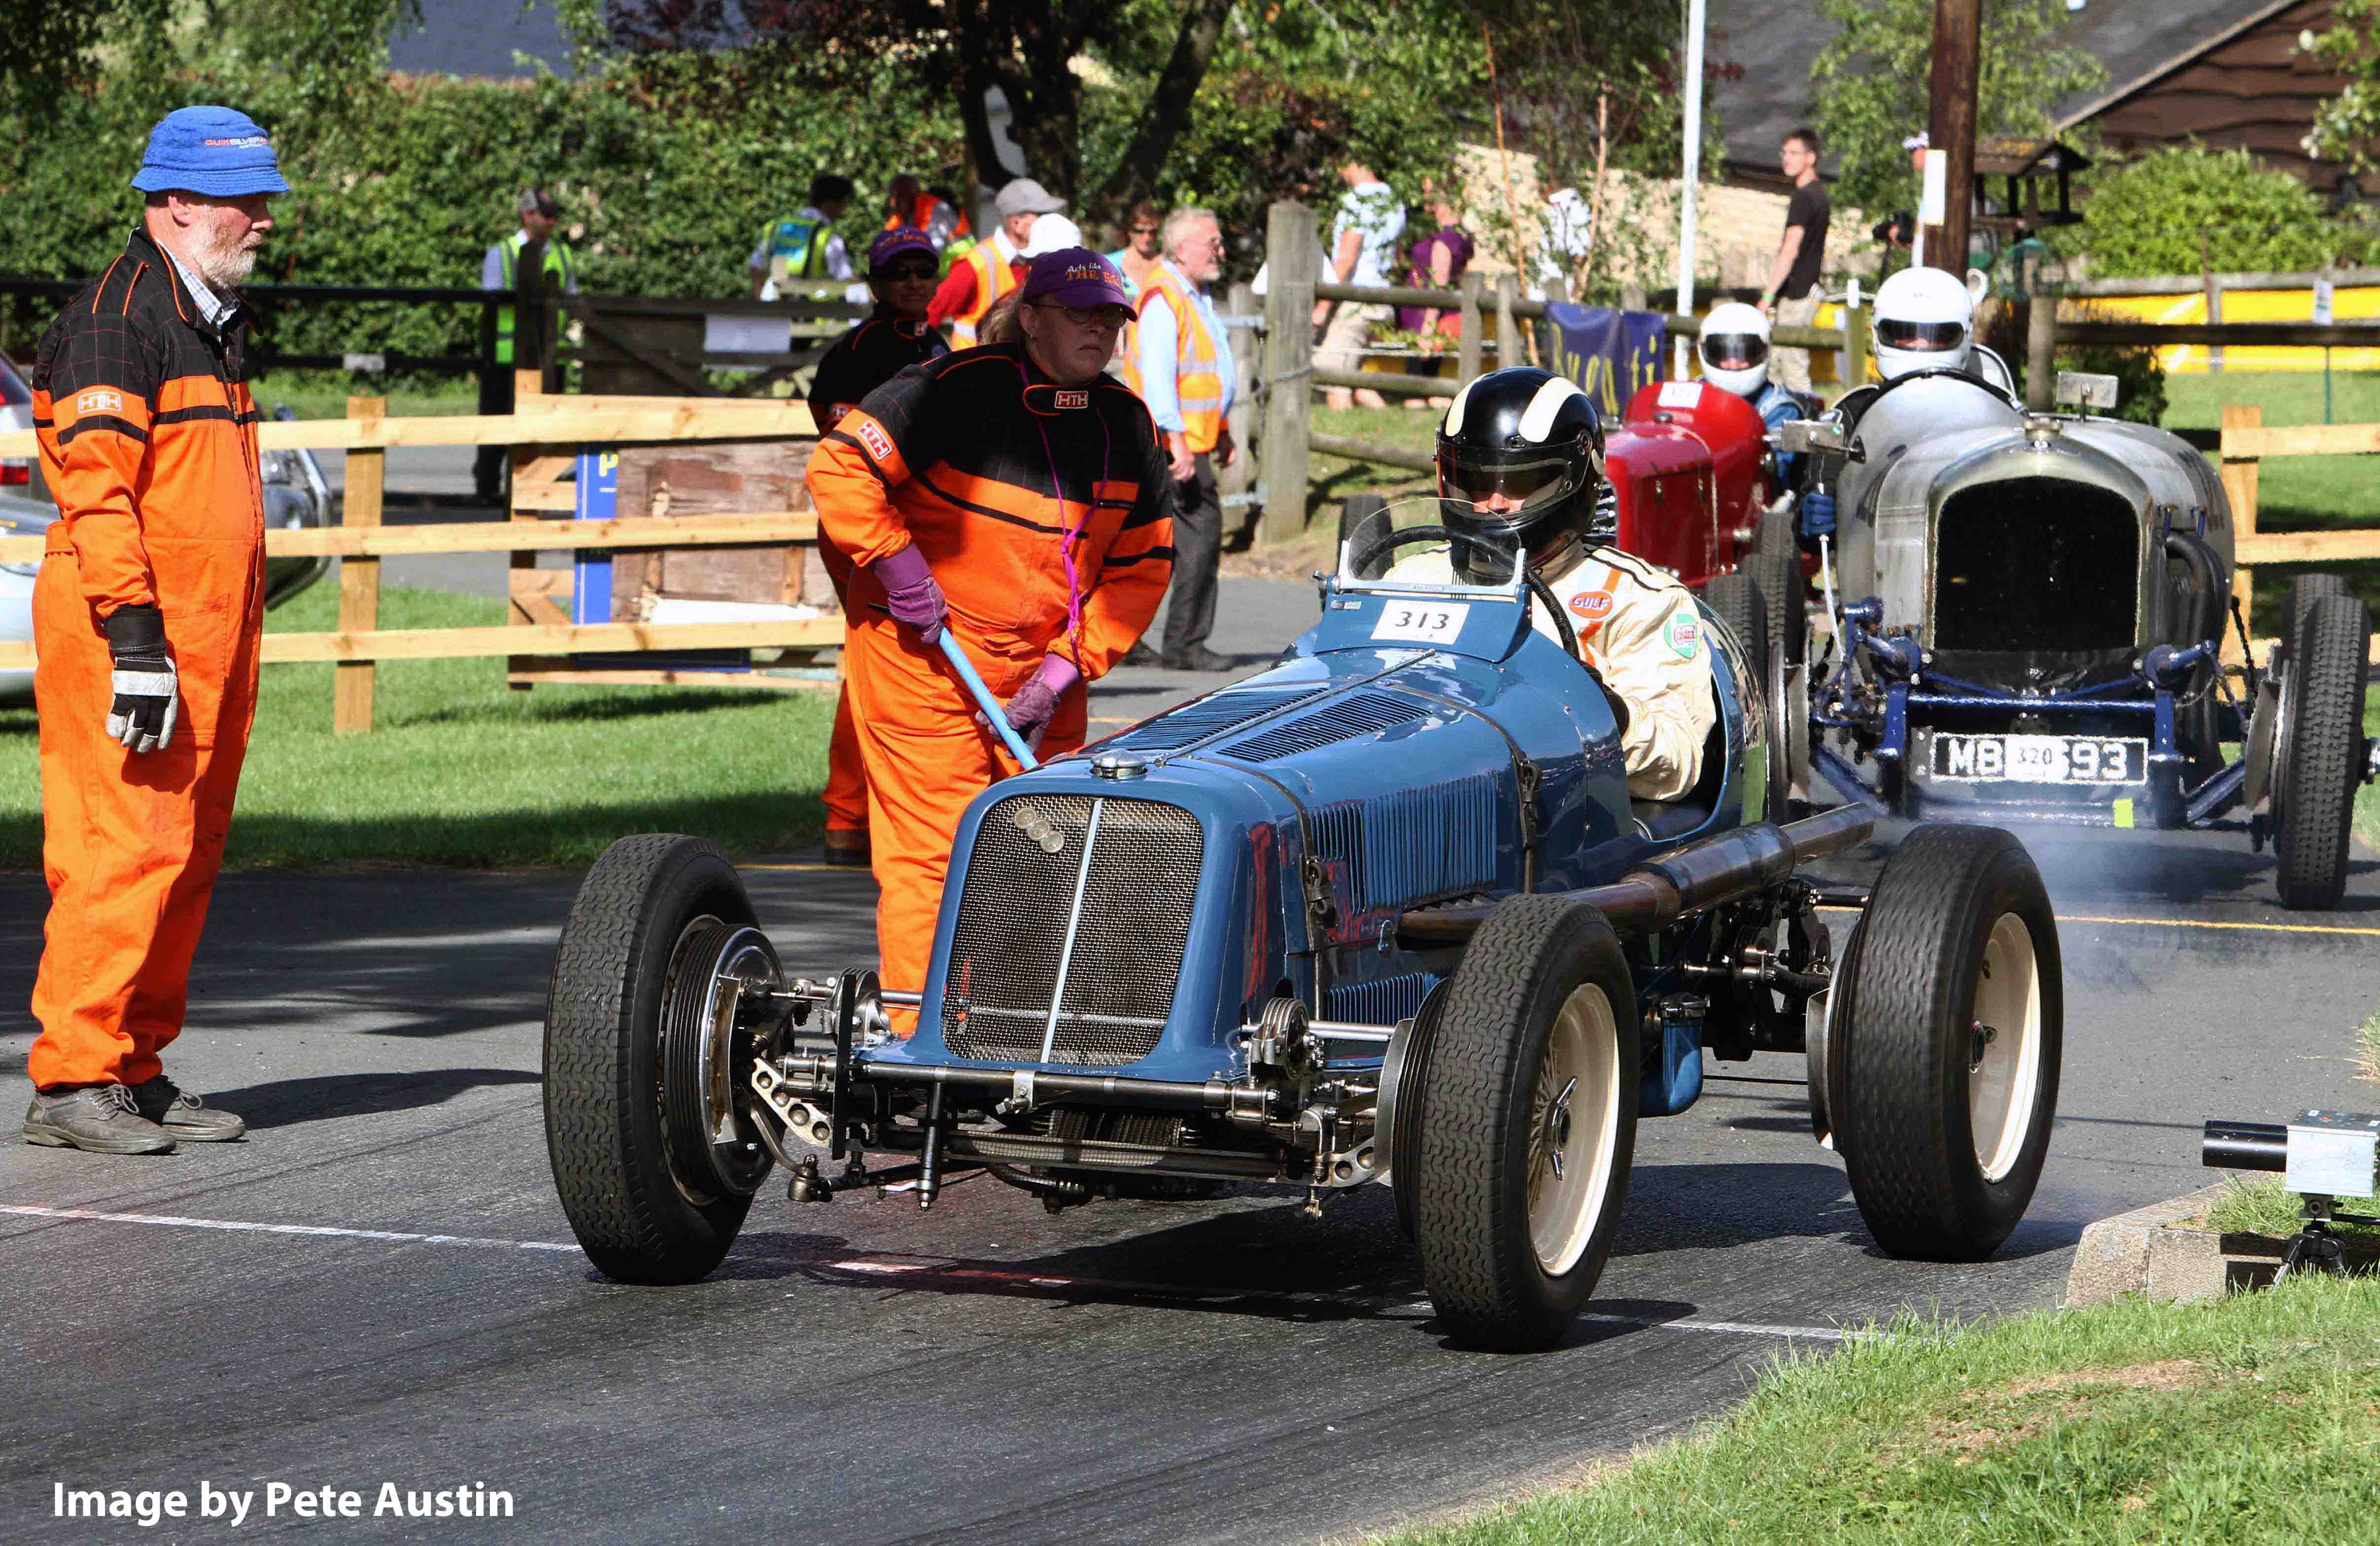 The first weekend in August can only mean one thing... it’s time for VSCC Prescott cover